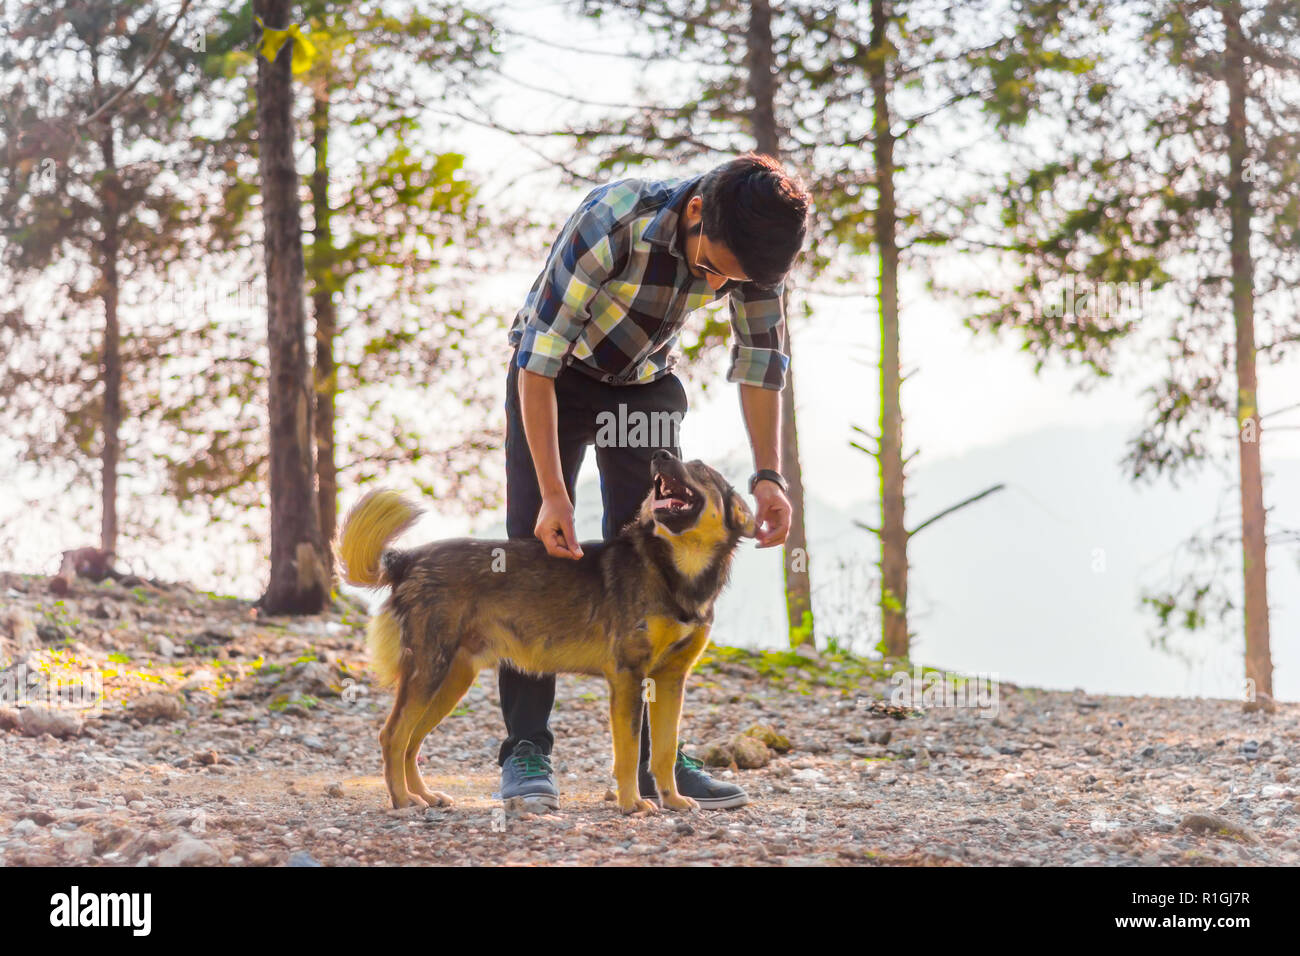 a black haired man bent over and playing with his dog on a rough, stony ground. In the background are conifer trees. Stock Photo